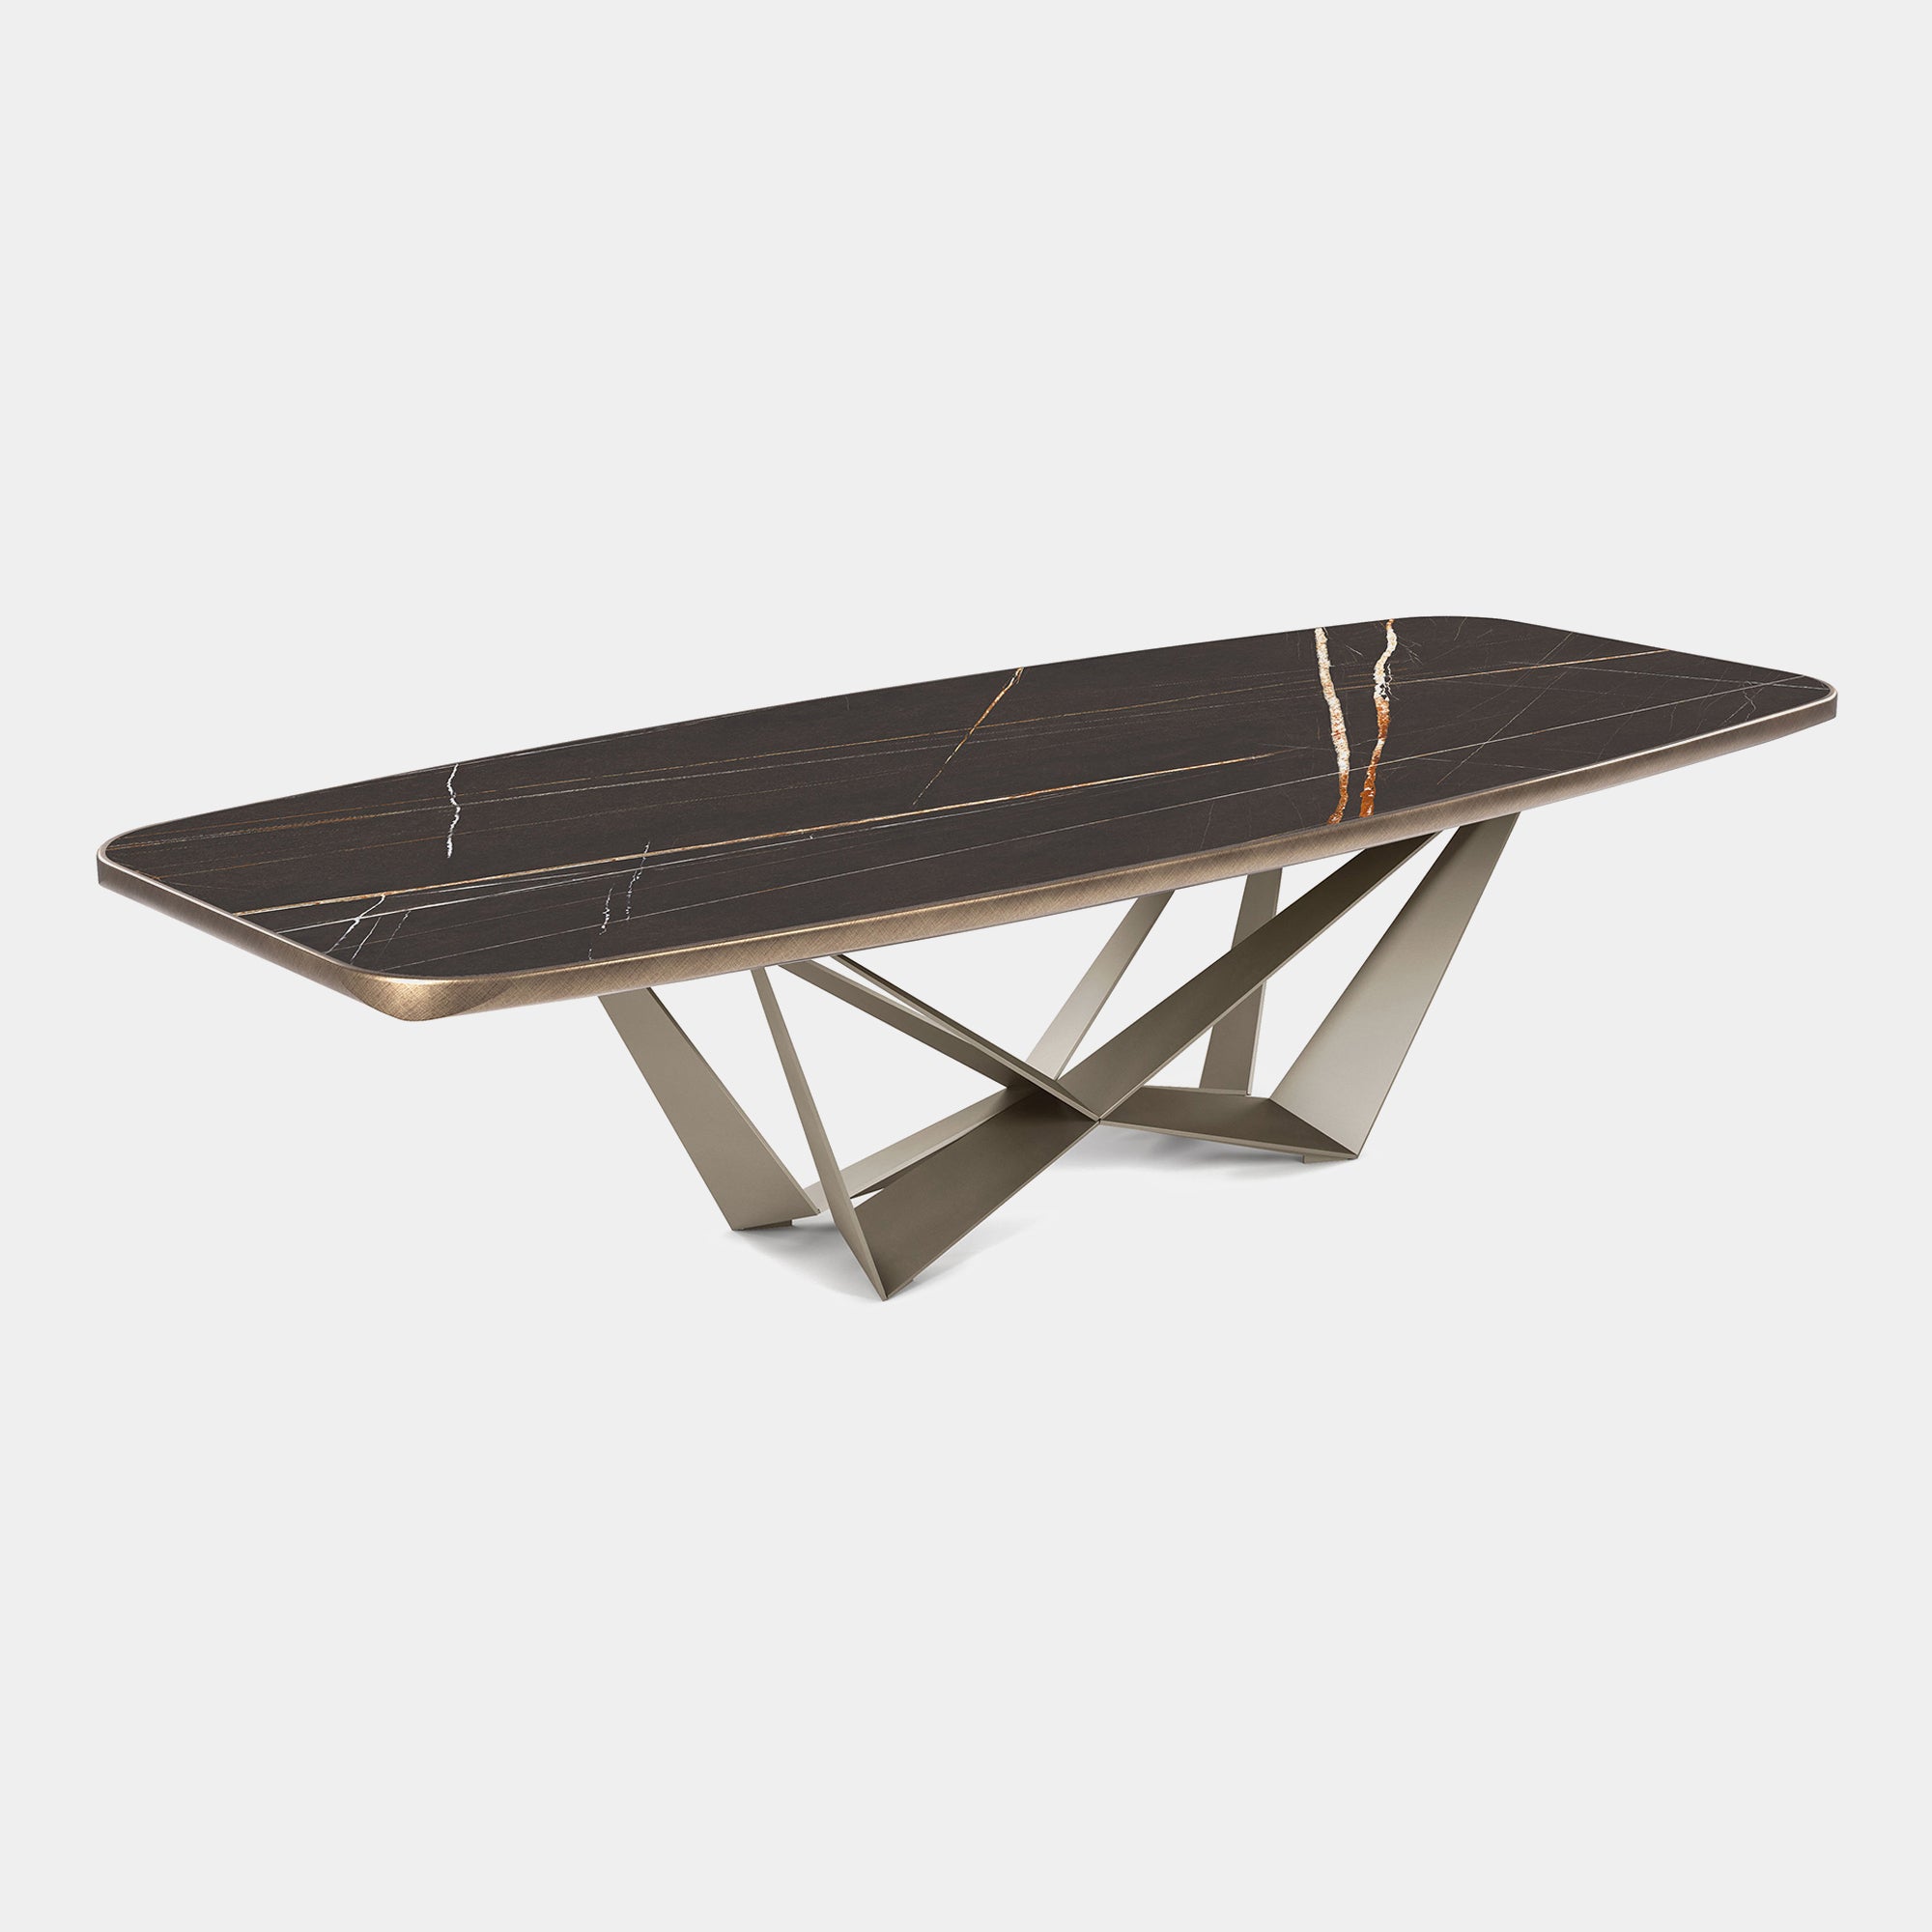 200cm x 120cm Table Brushed Bronze Rounded Profile With Graphite GFM69 Base